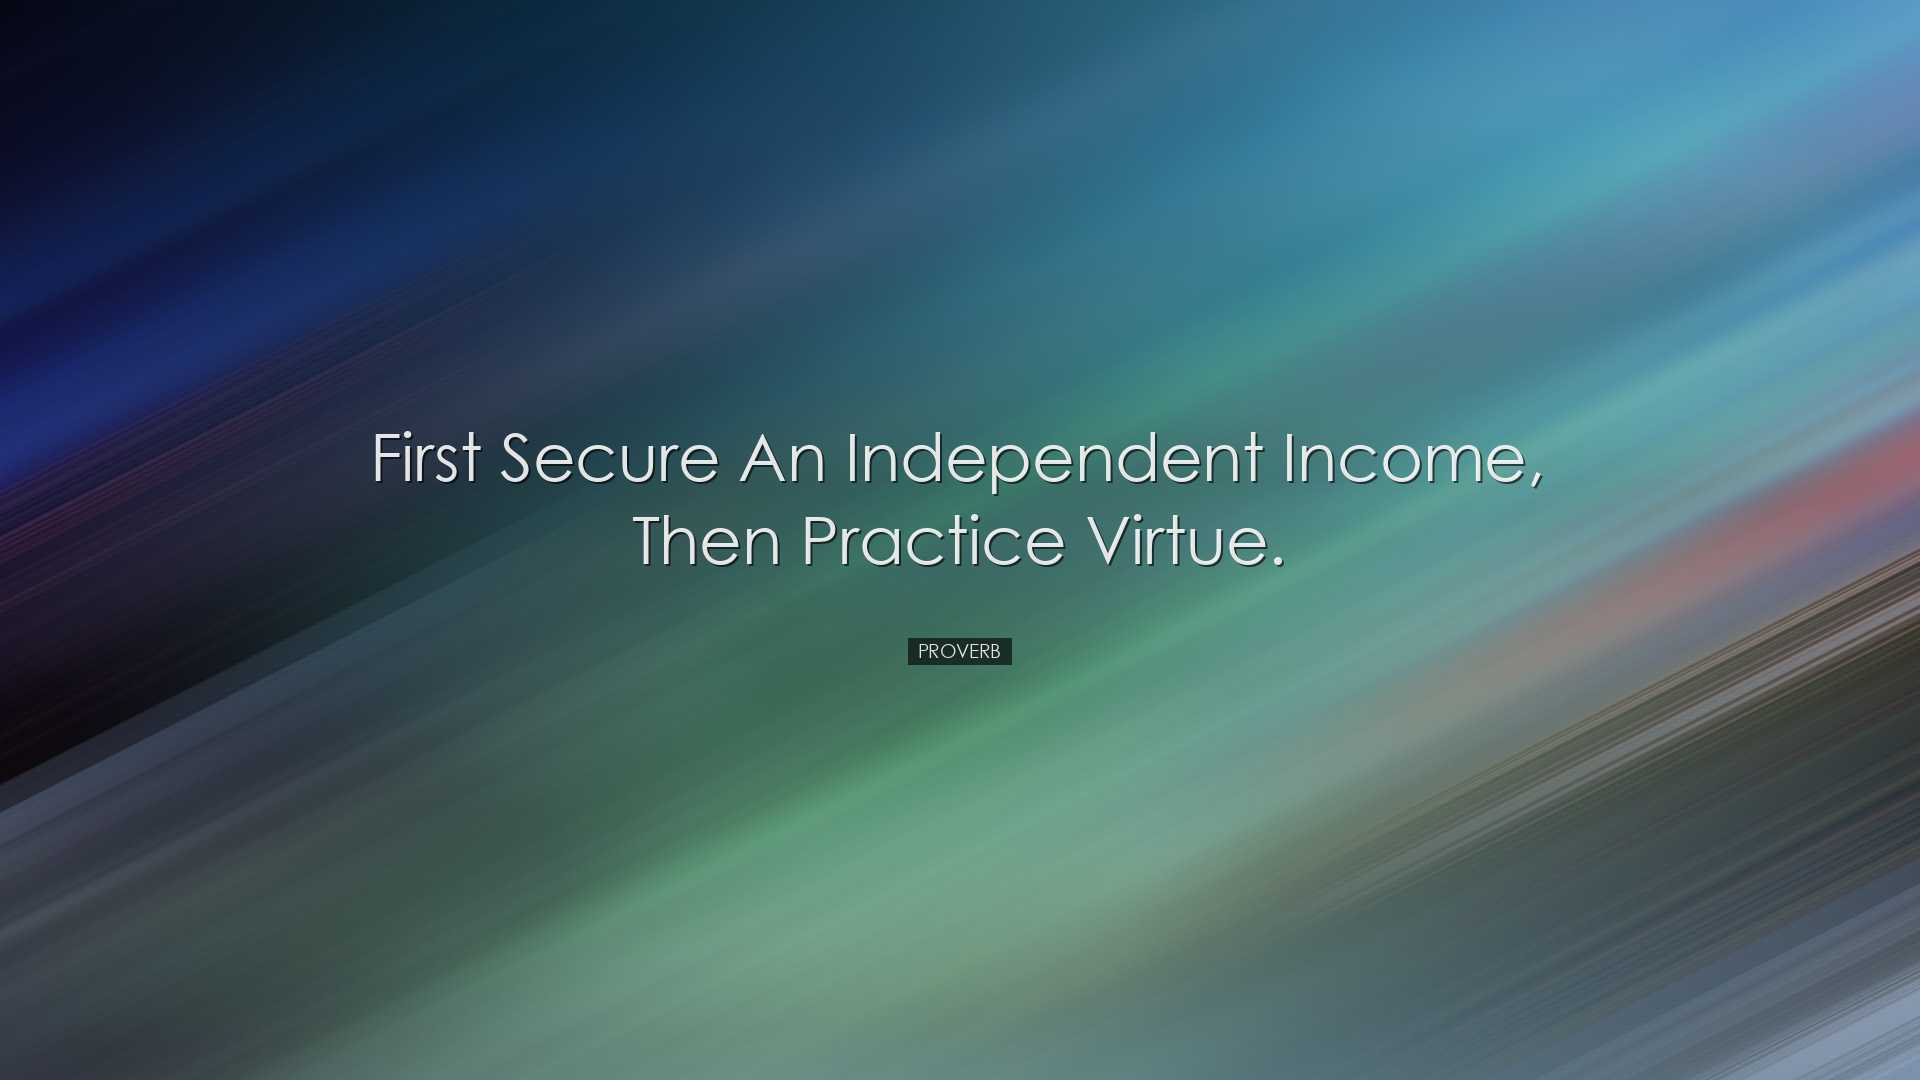 First secure an independent income, then practice virtue. - Prover